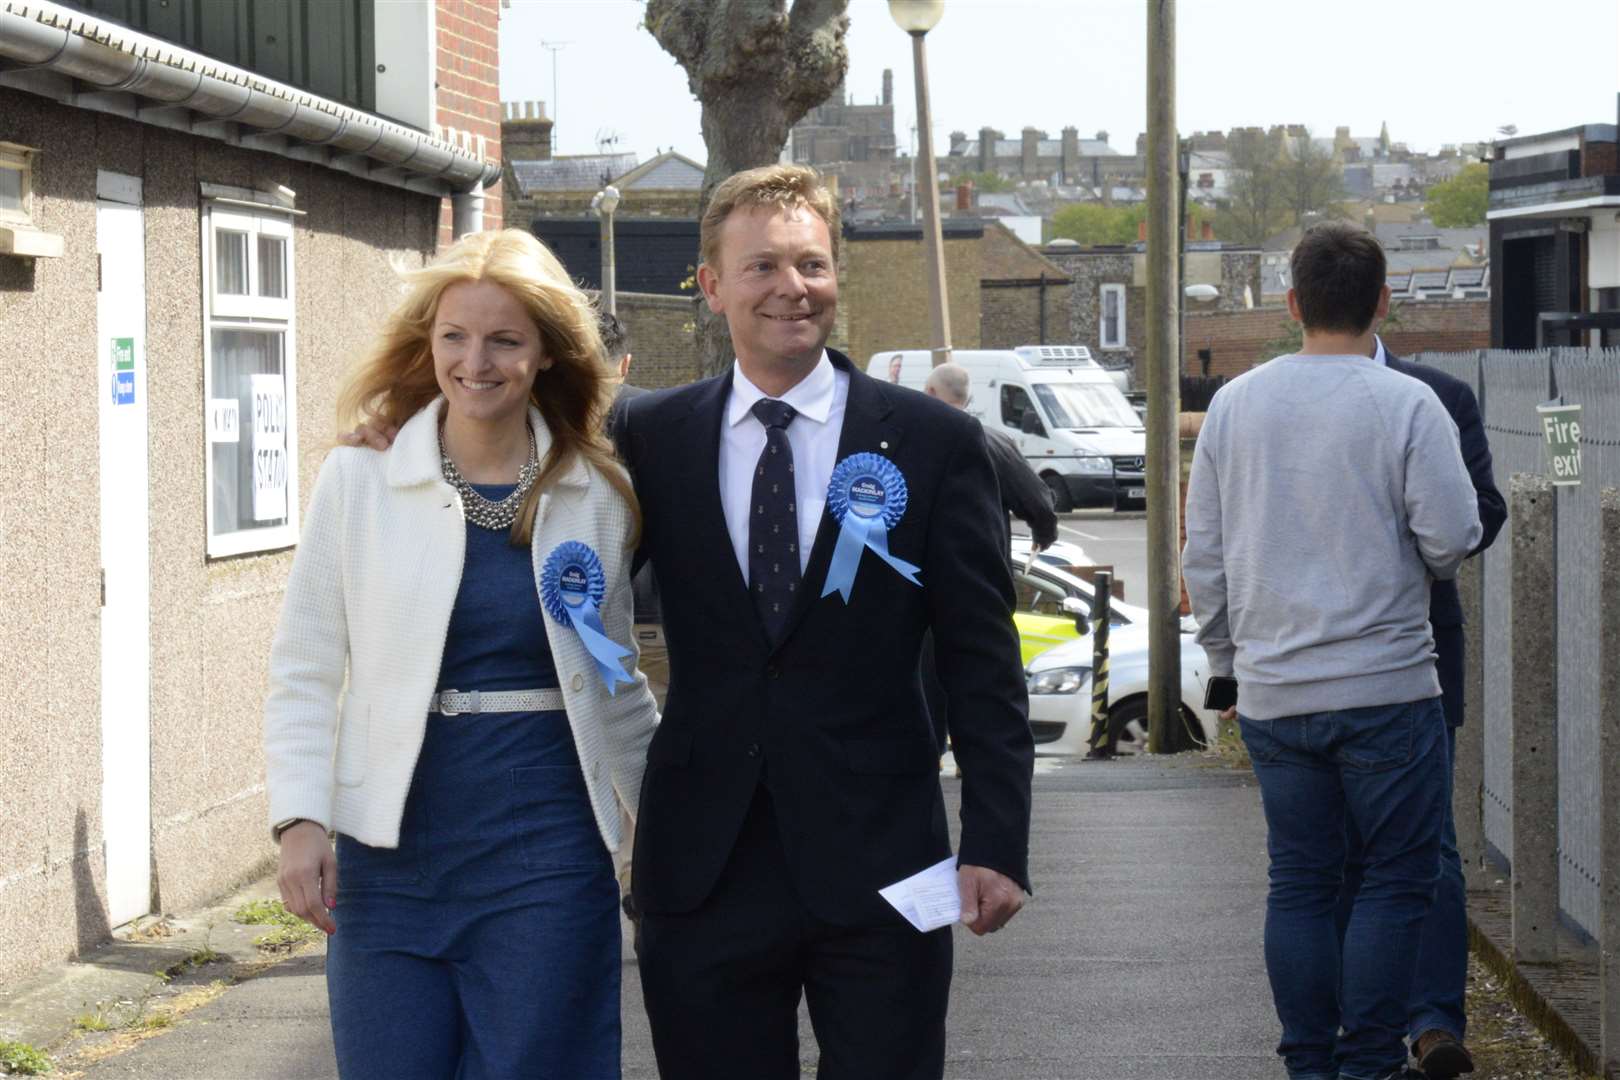 Conservative candidate Craig Mackinlay arrives to vote in Ramsgate with his wife Kati